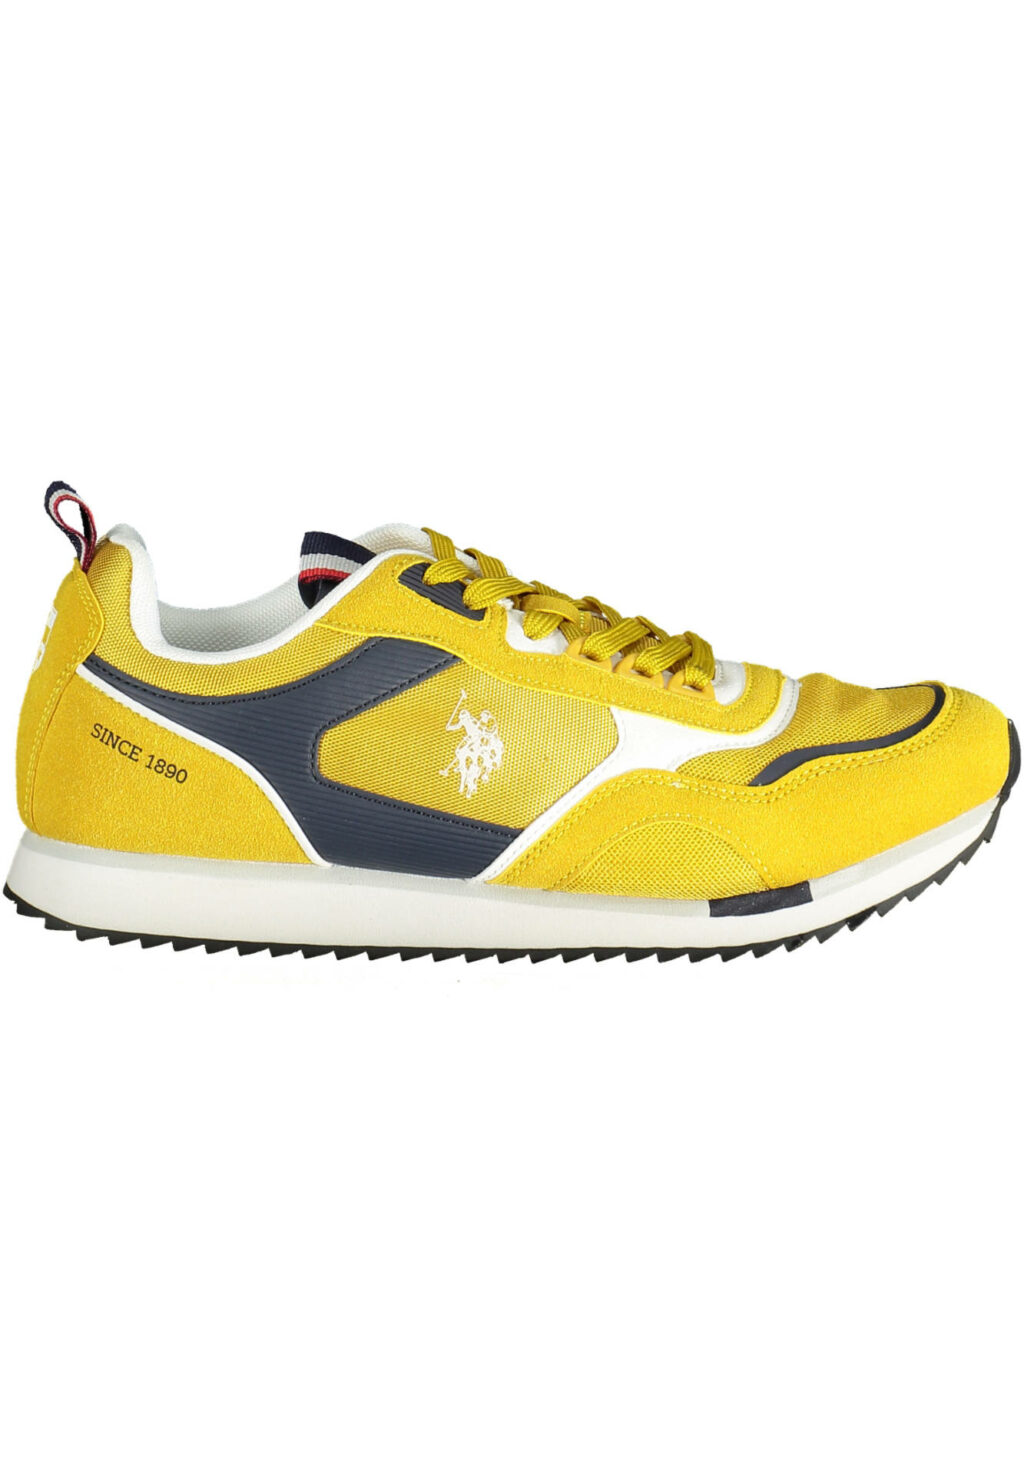 US POLO BEST PRICE YELLOW MAN SPORT SHOES ETHAN001M3TH1_GIALLO_YEL-DBL02